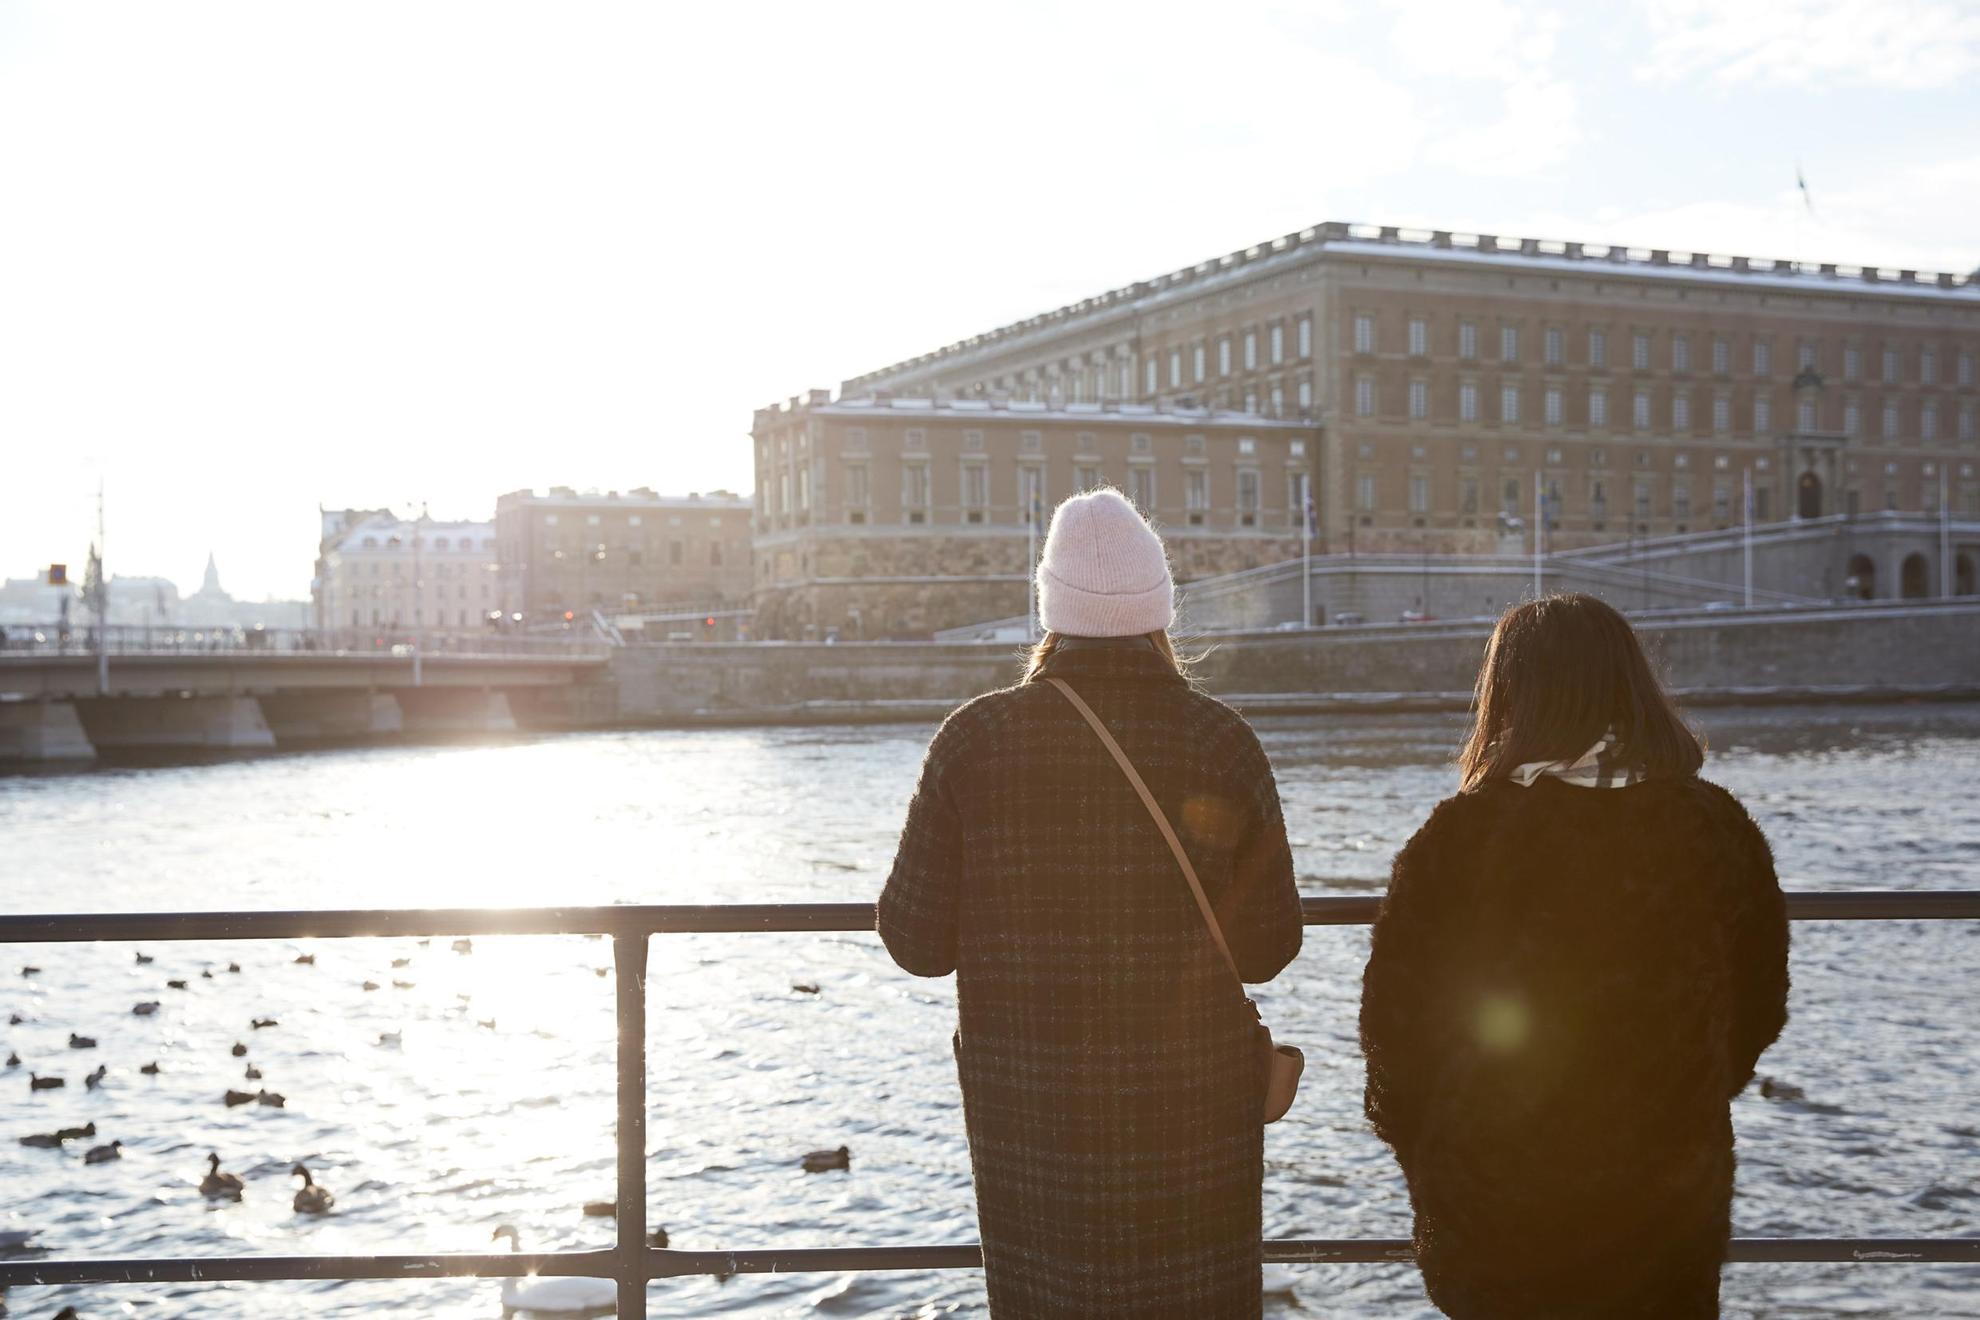 Women gazing out over the Royal Palace, Stockholm